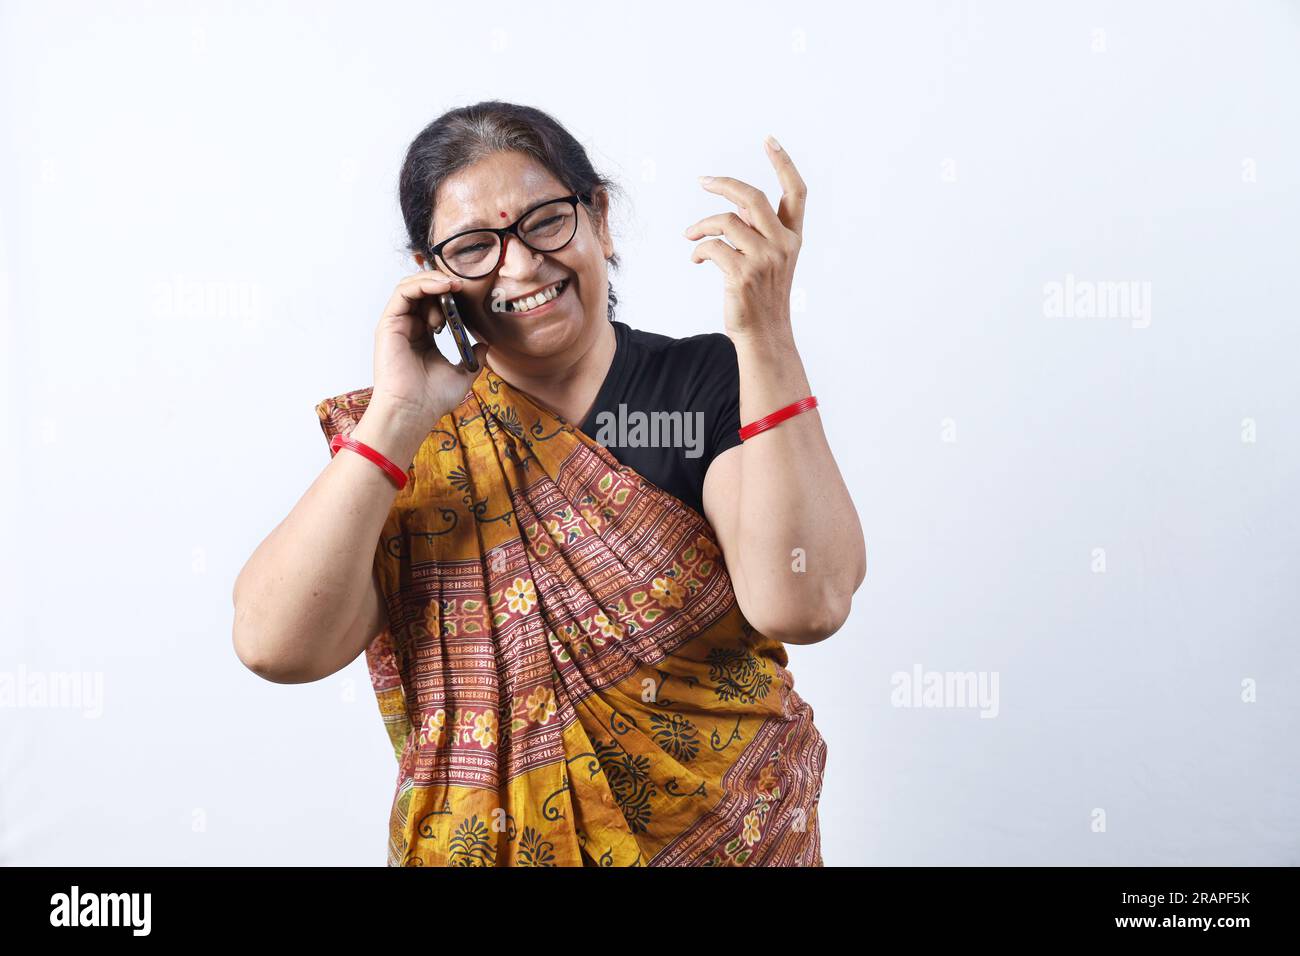 Rural Indian old woman wearing saree portraying various expressions on phone. She is holding a mobile phone. Go digital concept in rural India. Stock Photo